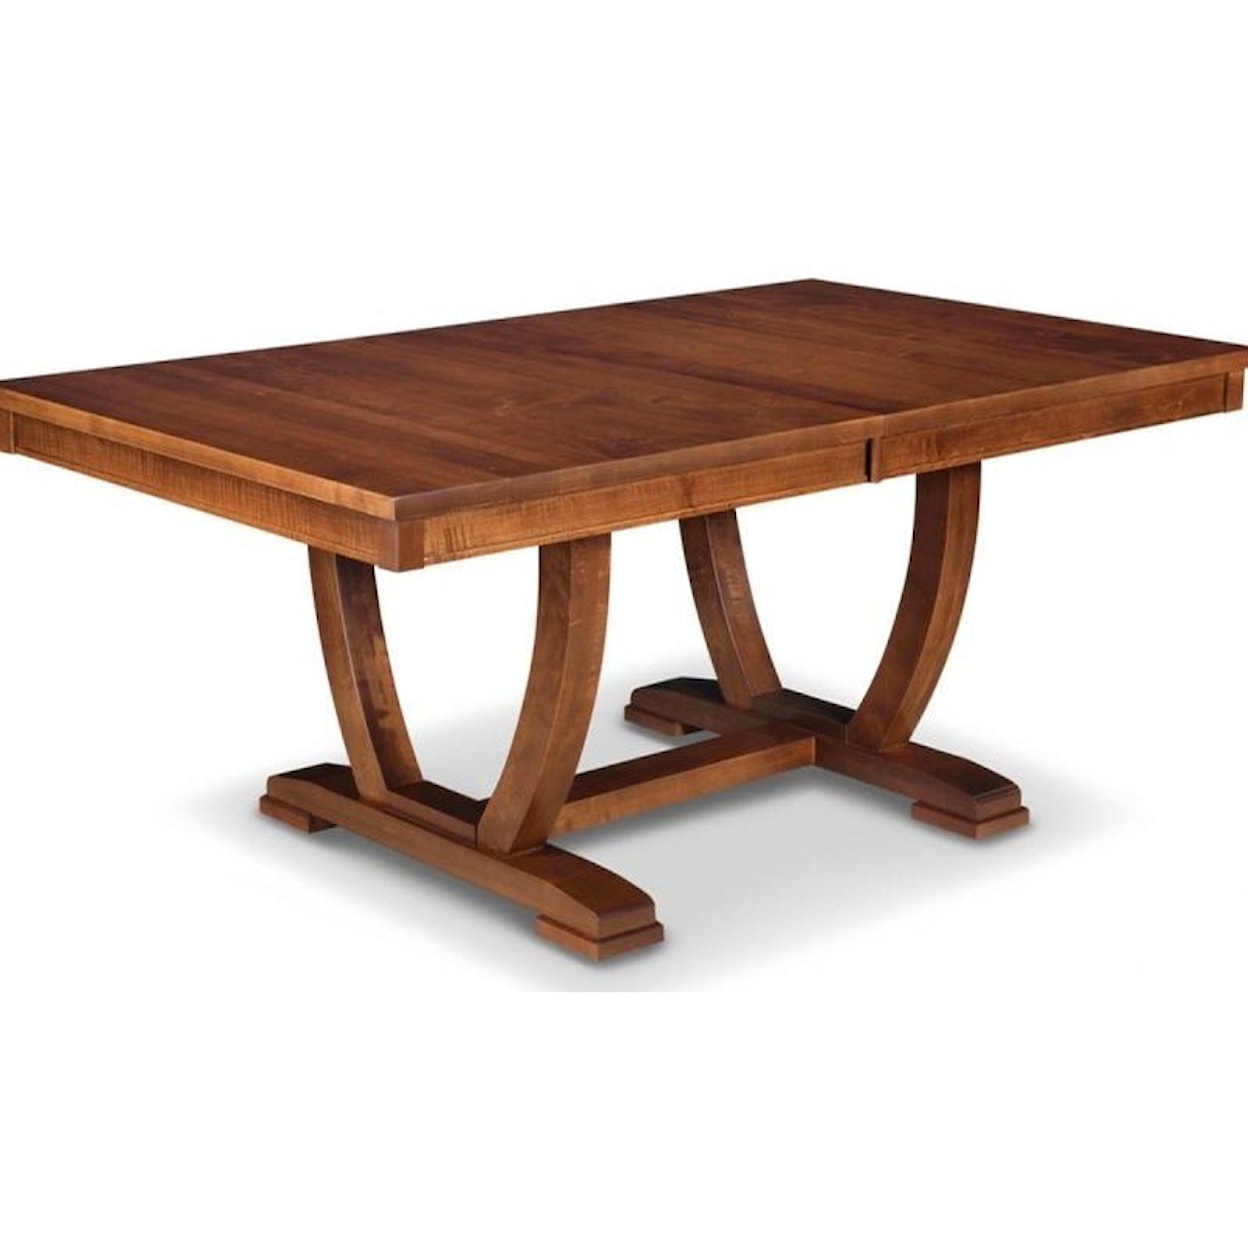 Handstone Florence 42x72" Solid Top Trestle Dining Table